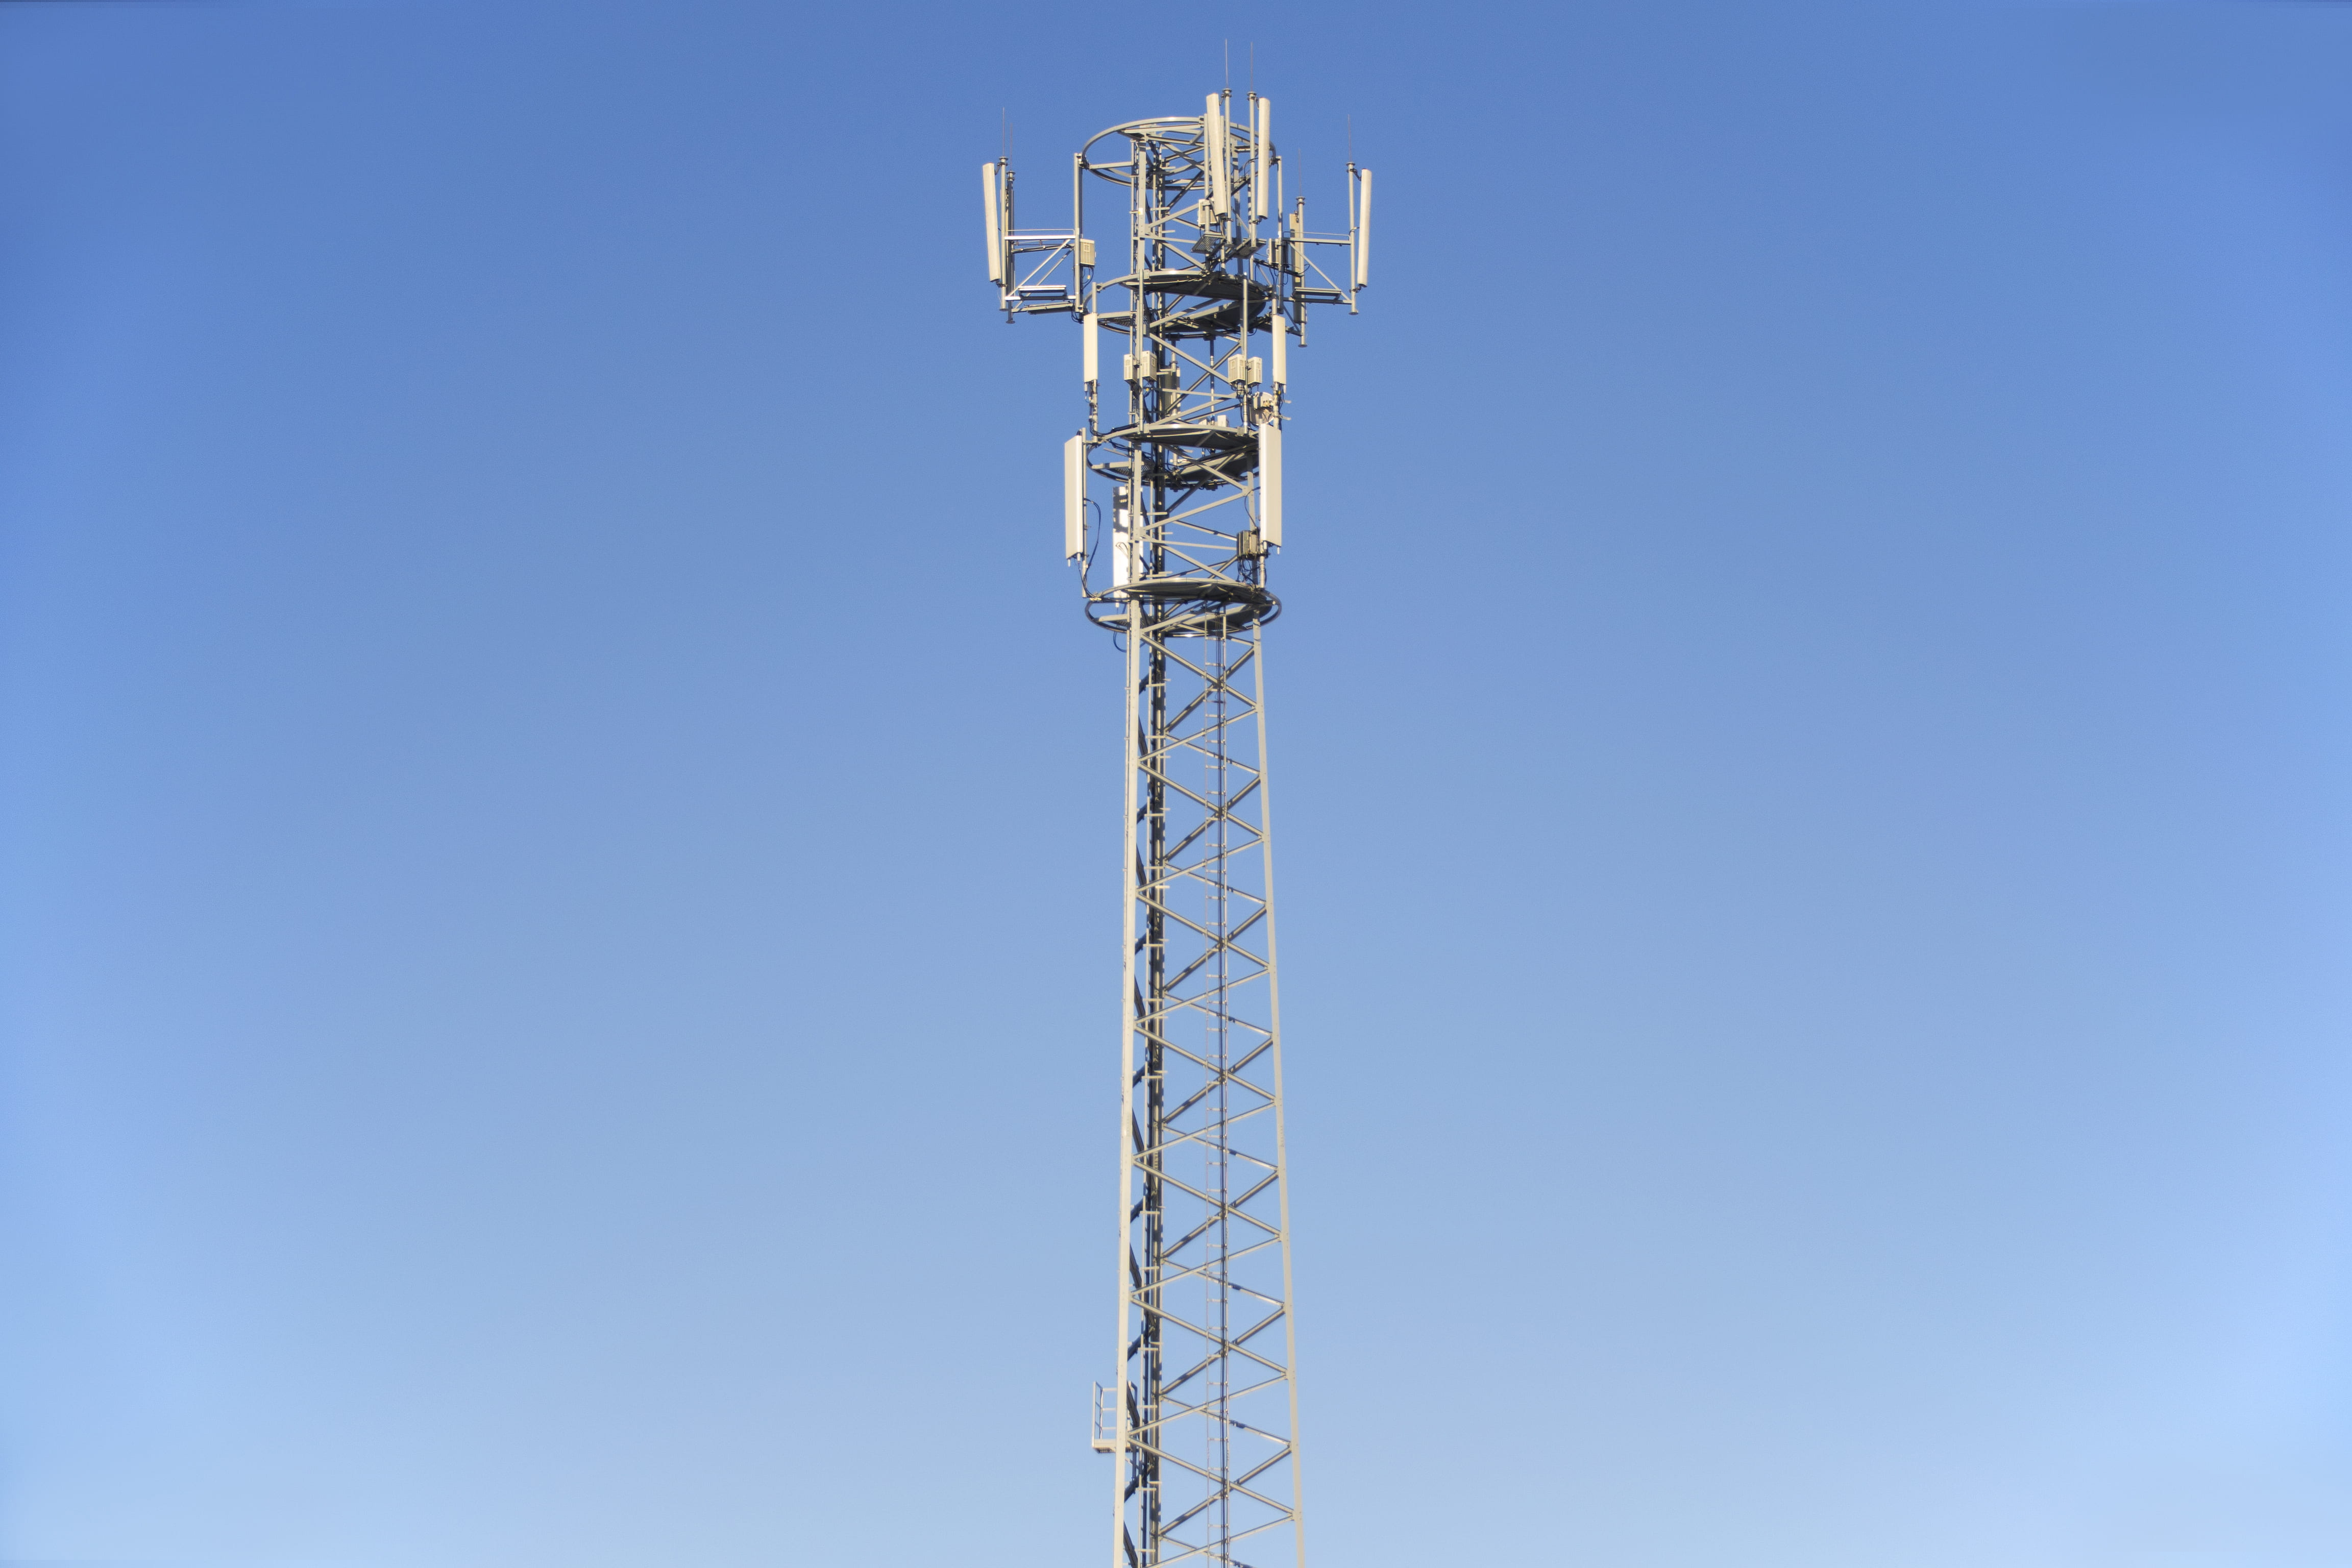 sky, technology, high, tower, antenna, blue sky, cell tower, electronics